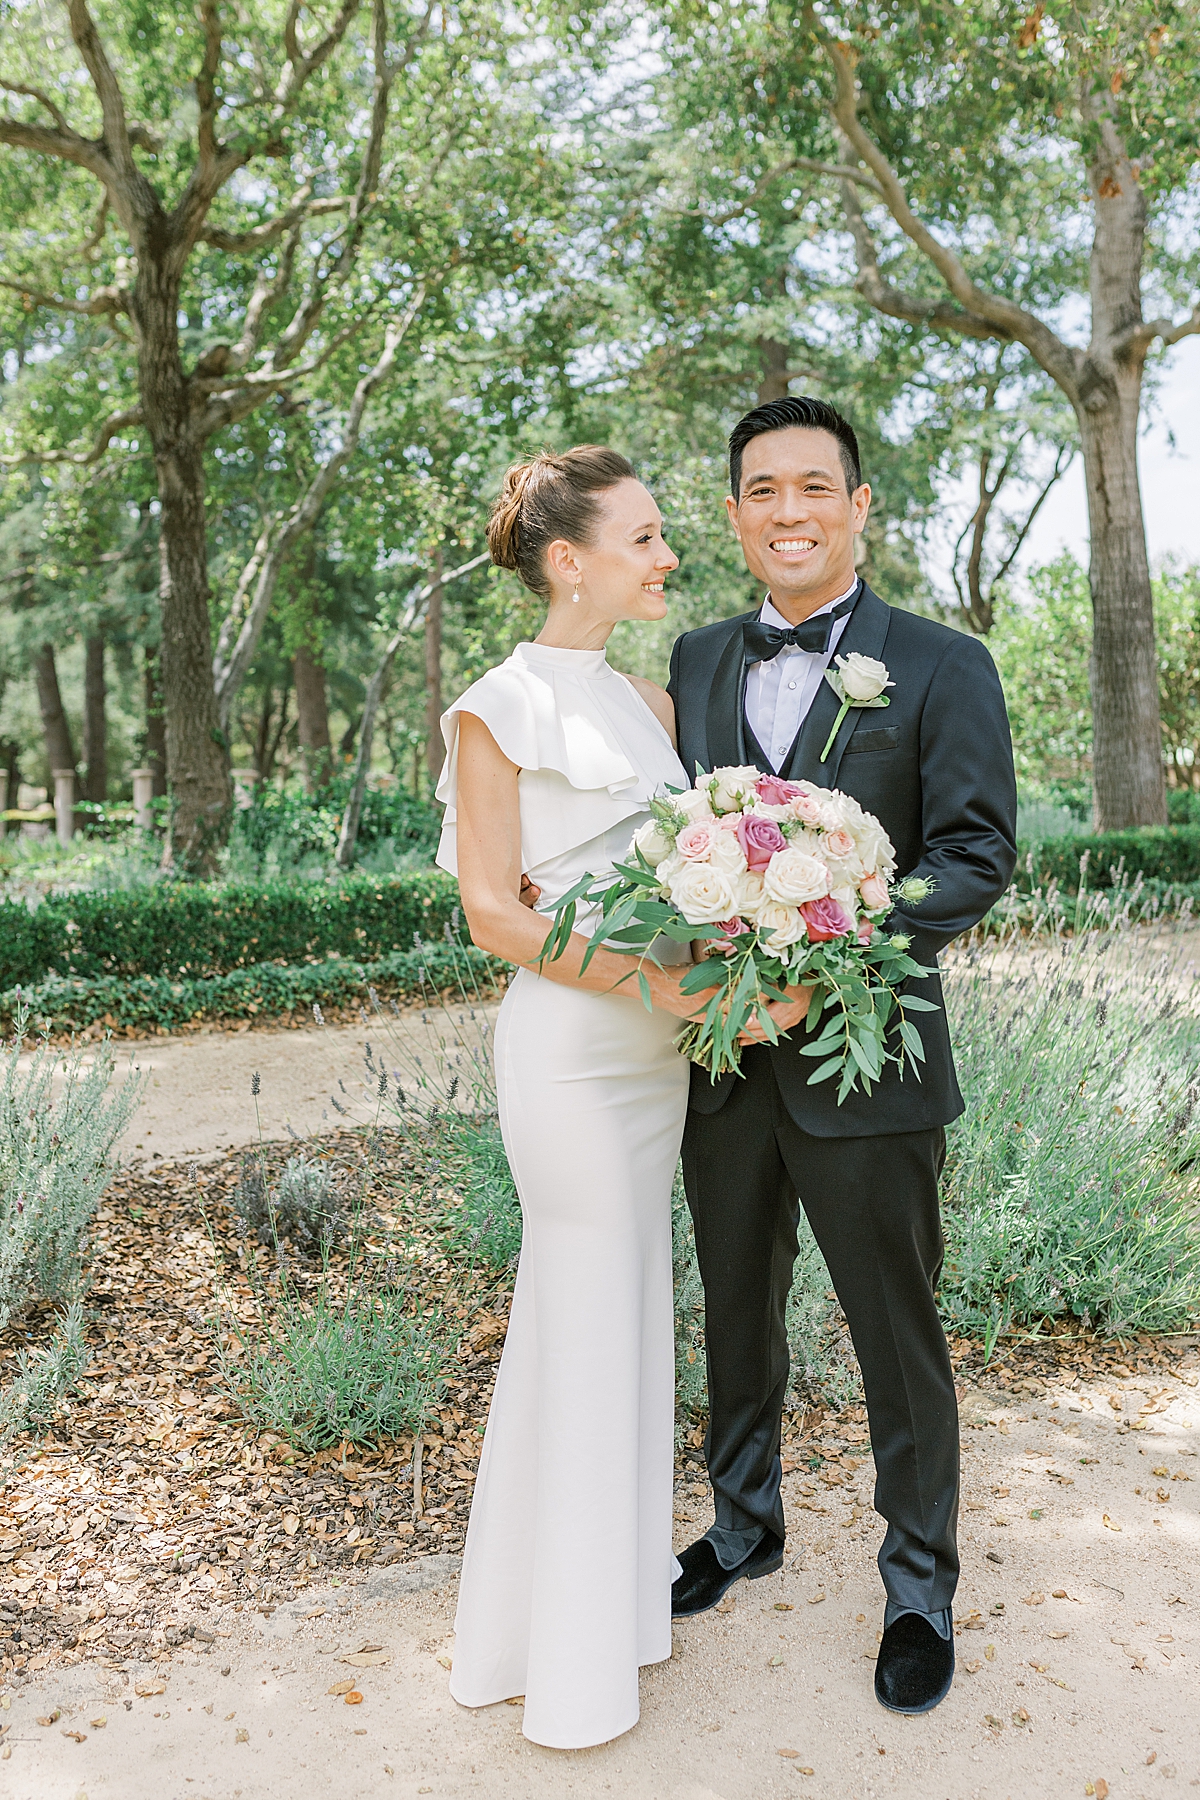 Erica is smiling at Gideon and Gideon is looking at the camera as they hold her bouquet of flowers between them just minutes before they traveled to the ceremony space of their Montecito Church Wedding.